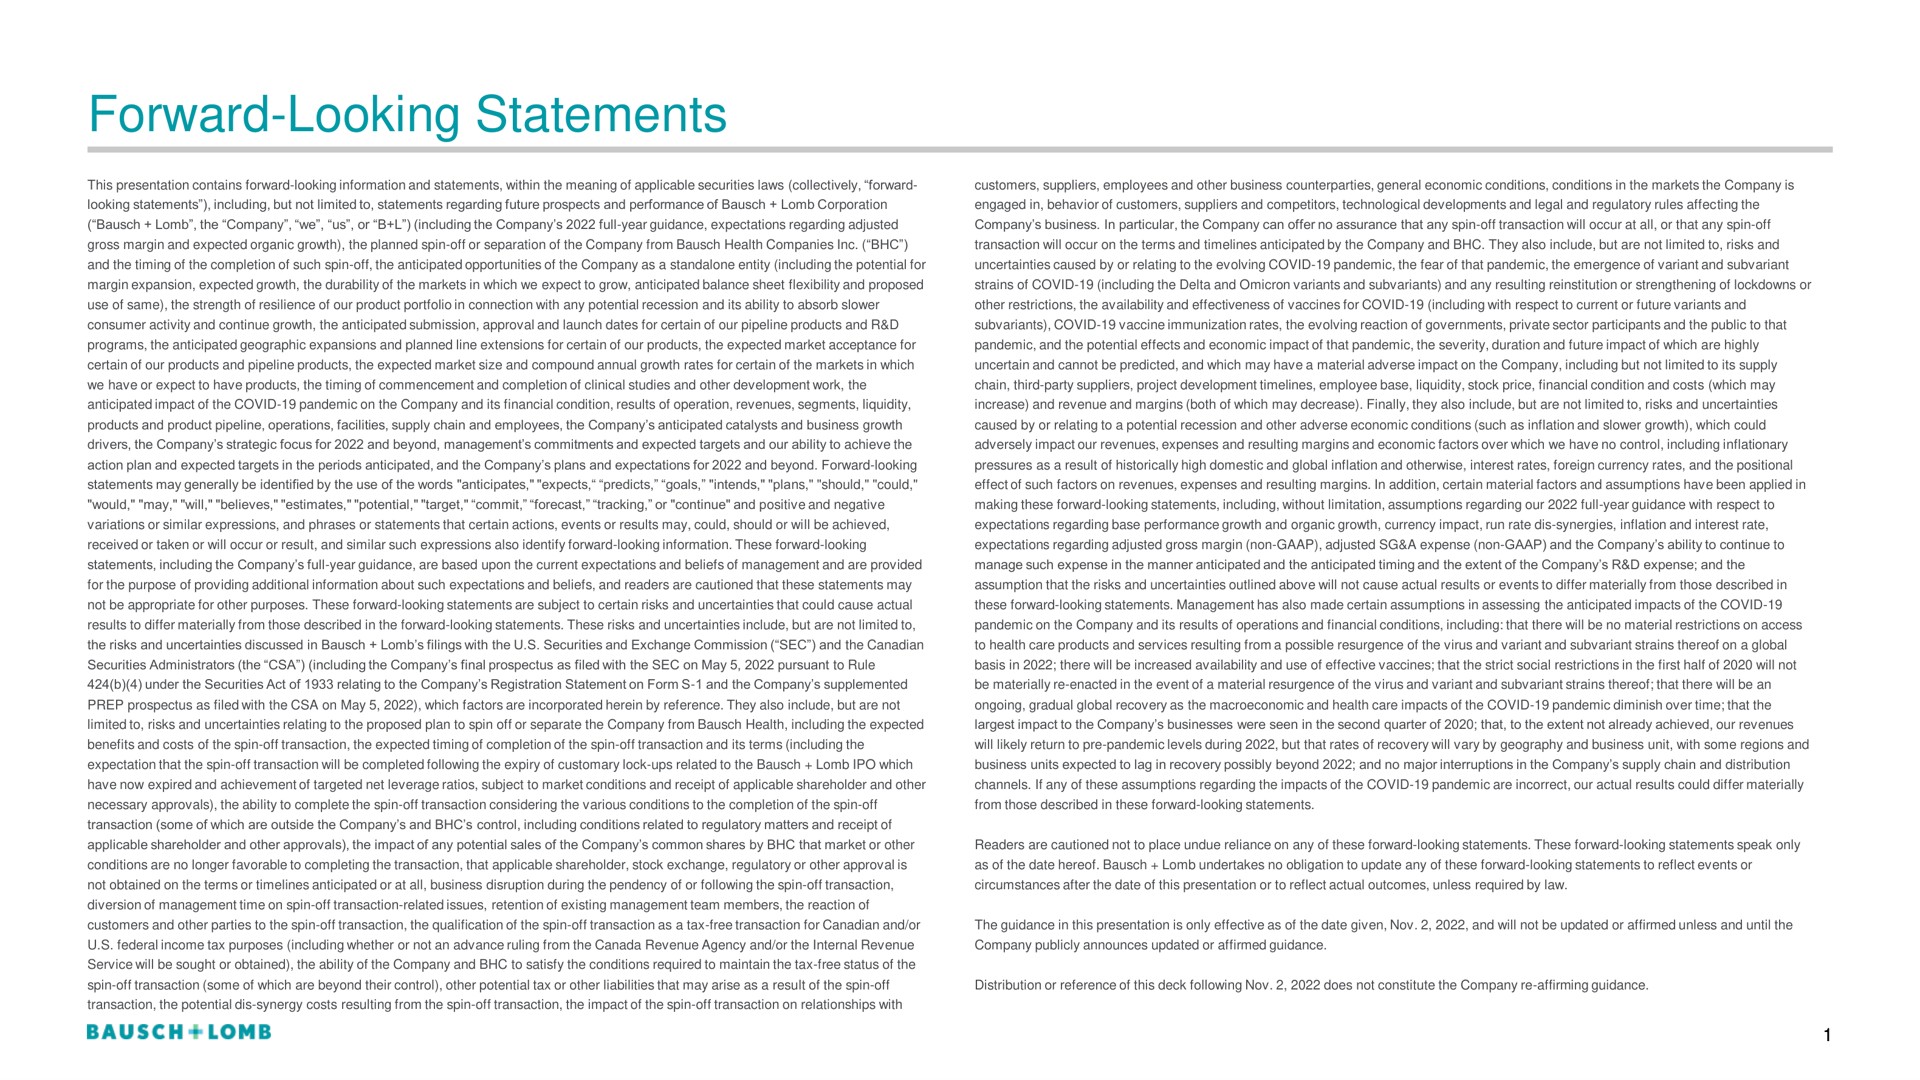 forward looking statements | Bausch+Lomb